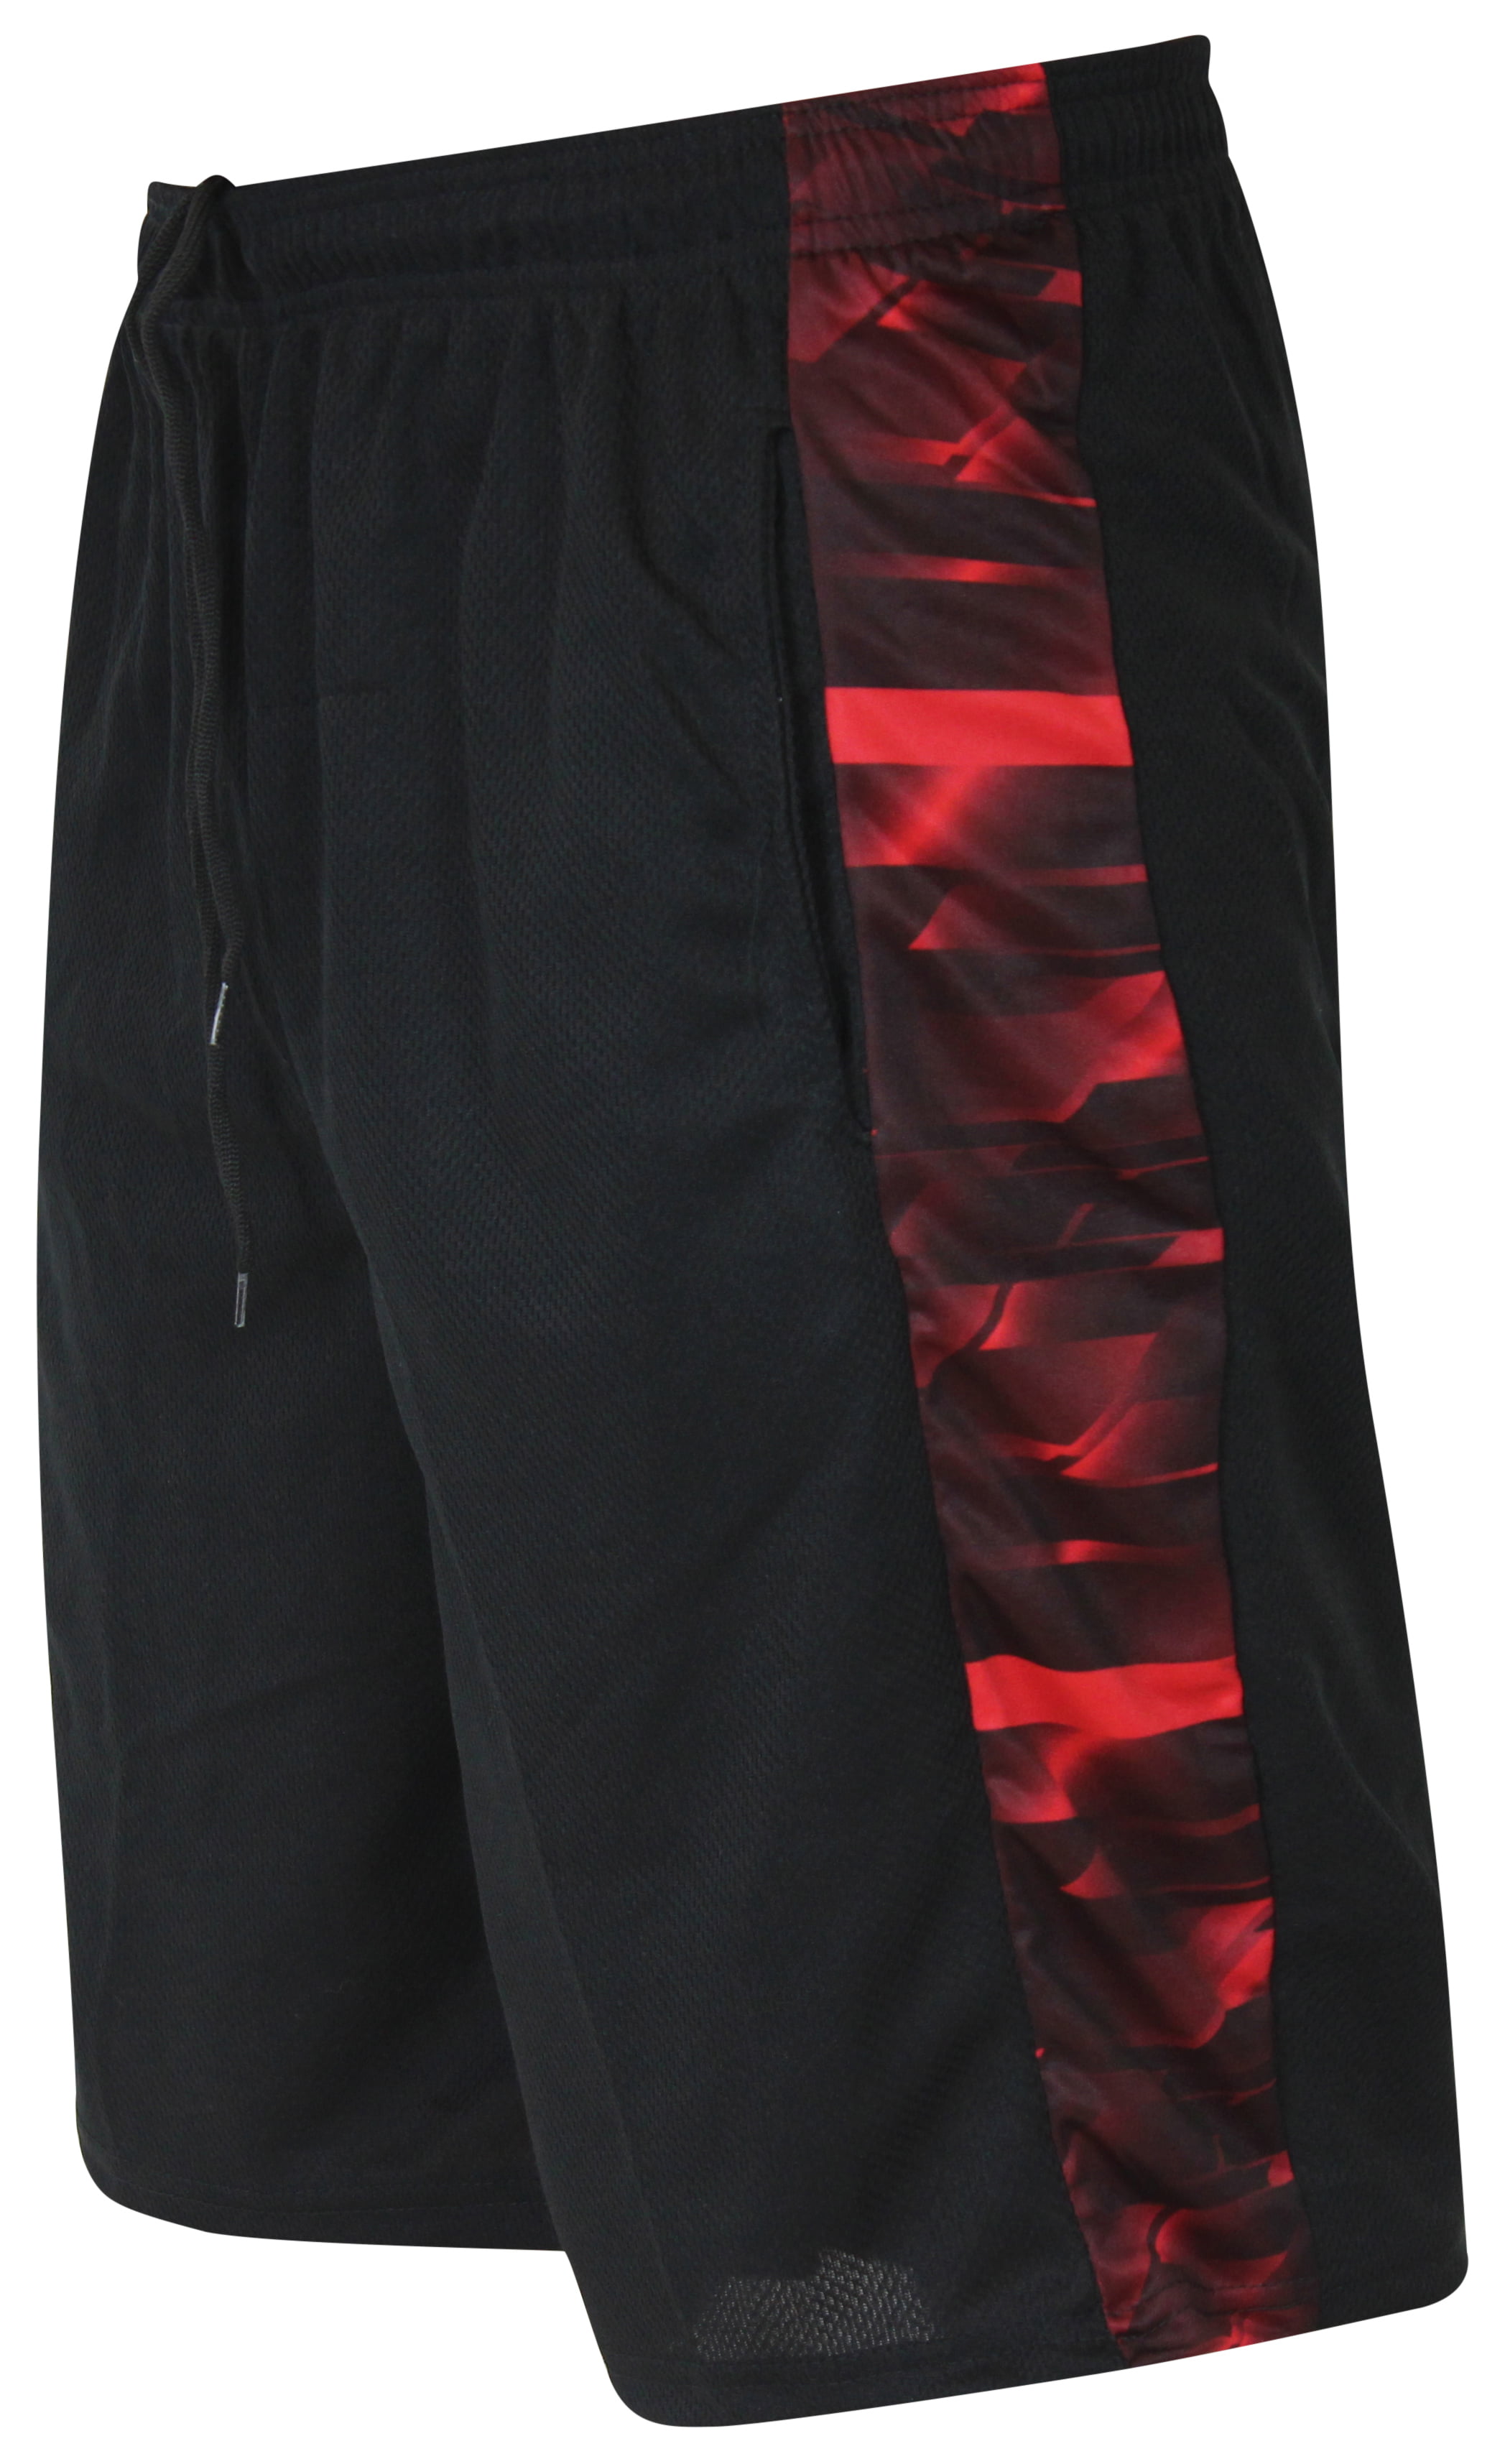 Real Essentials Boys 5-Pack Mesh Active Athletic Performance Basketball Shorts with Pockets 